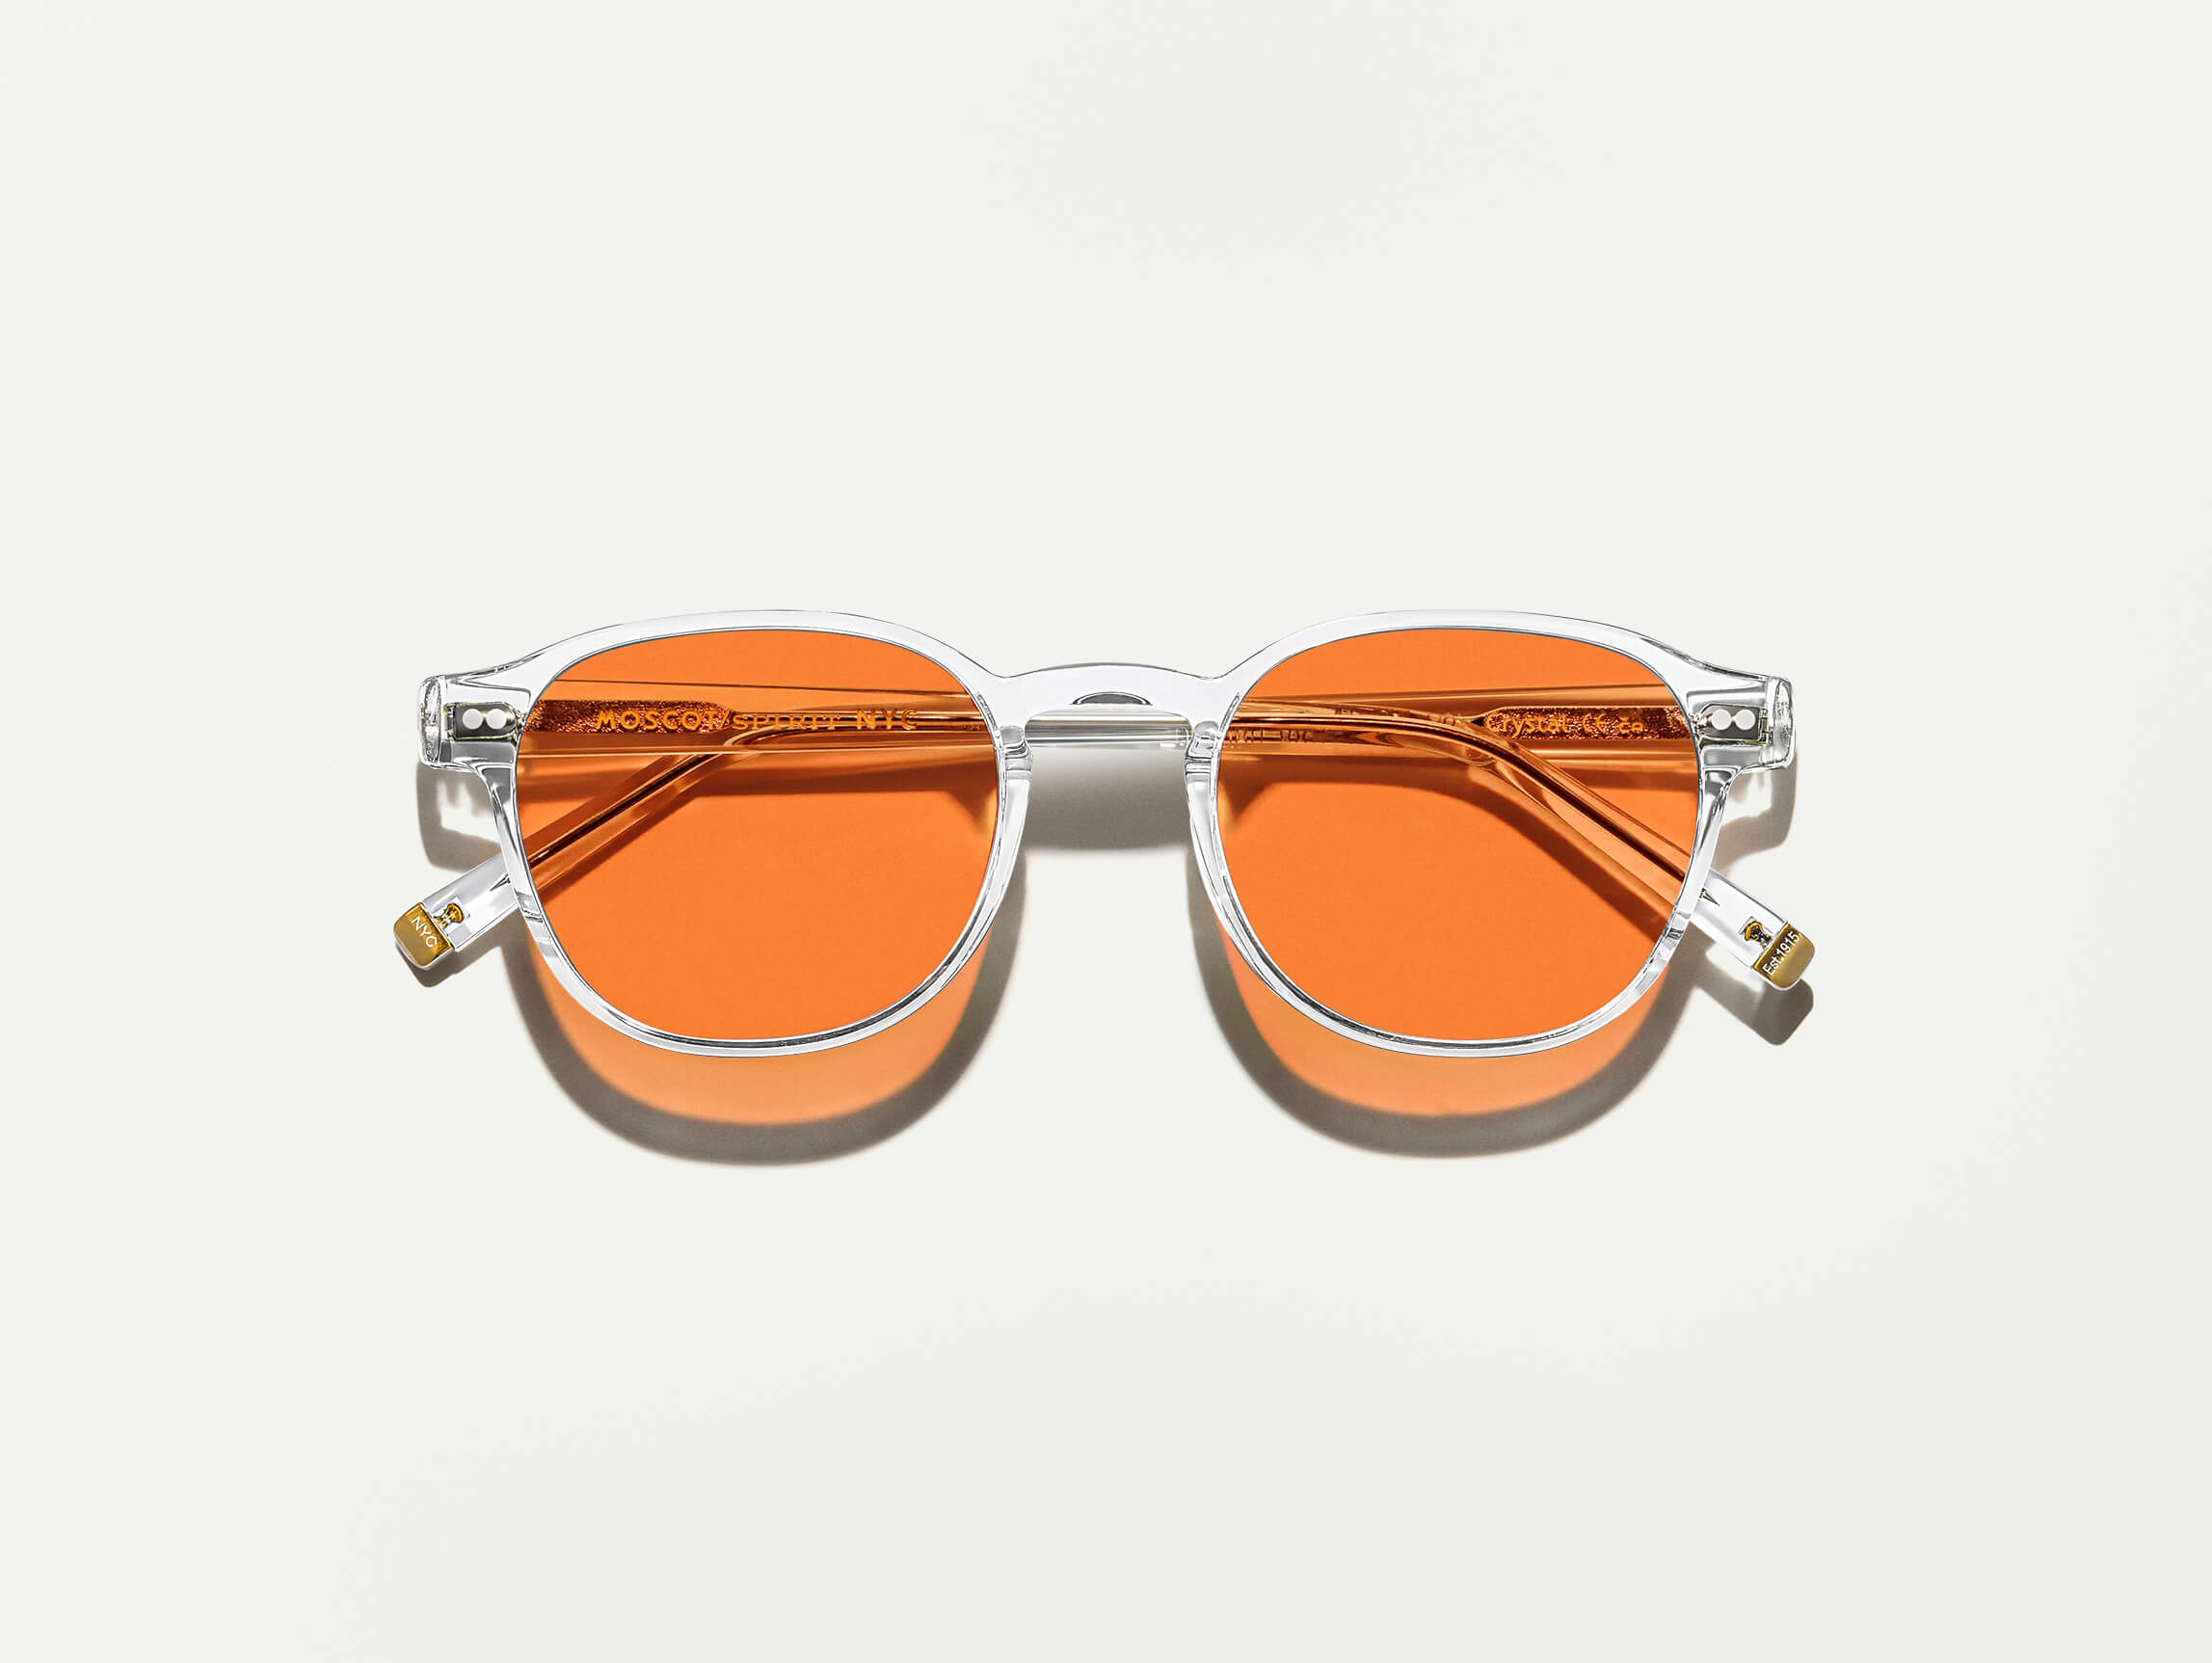 The ARTHUR Crystal with Woodstock Orange Tinted Lenses